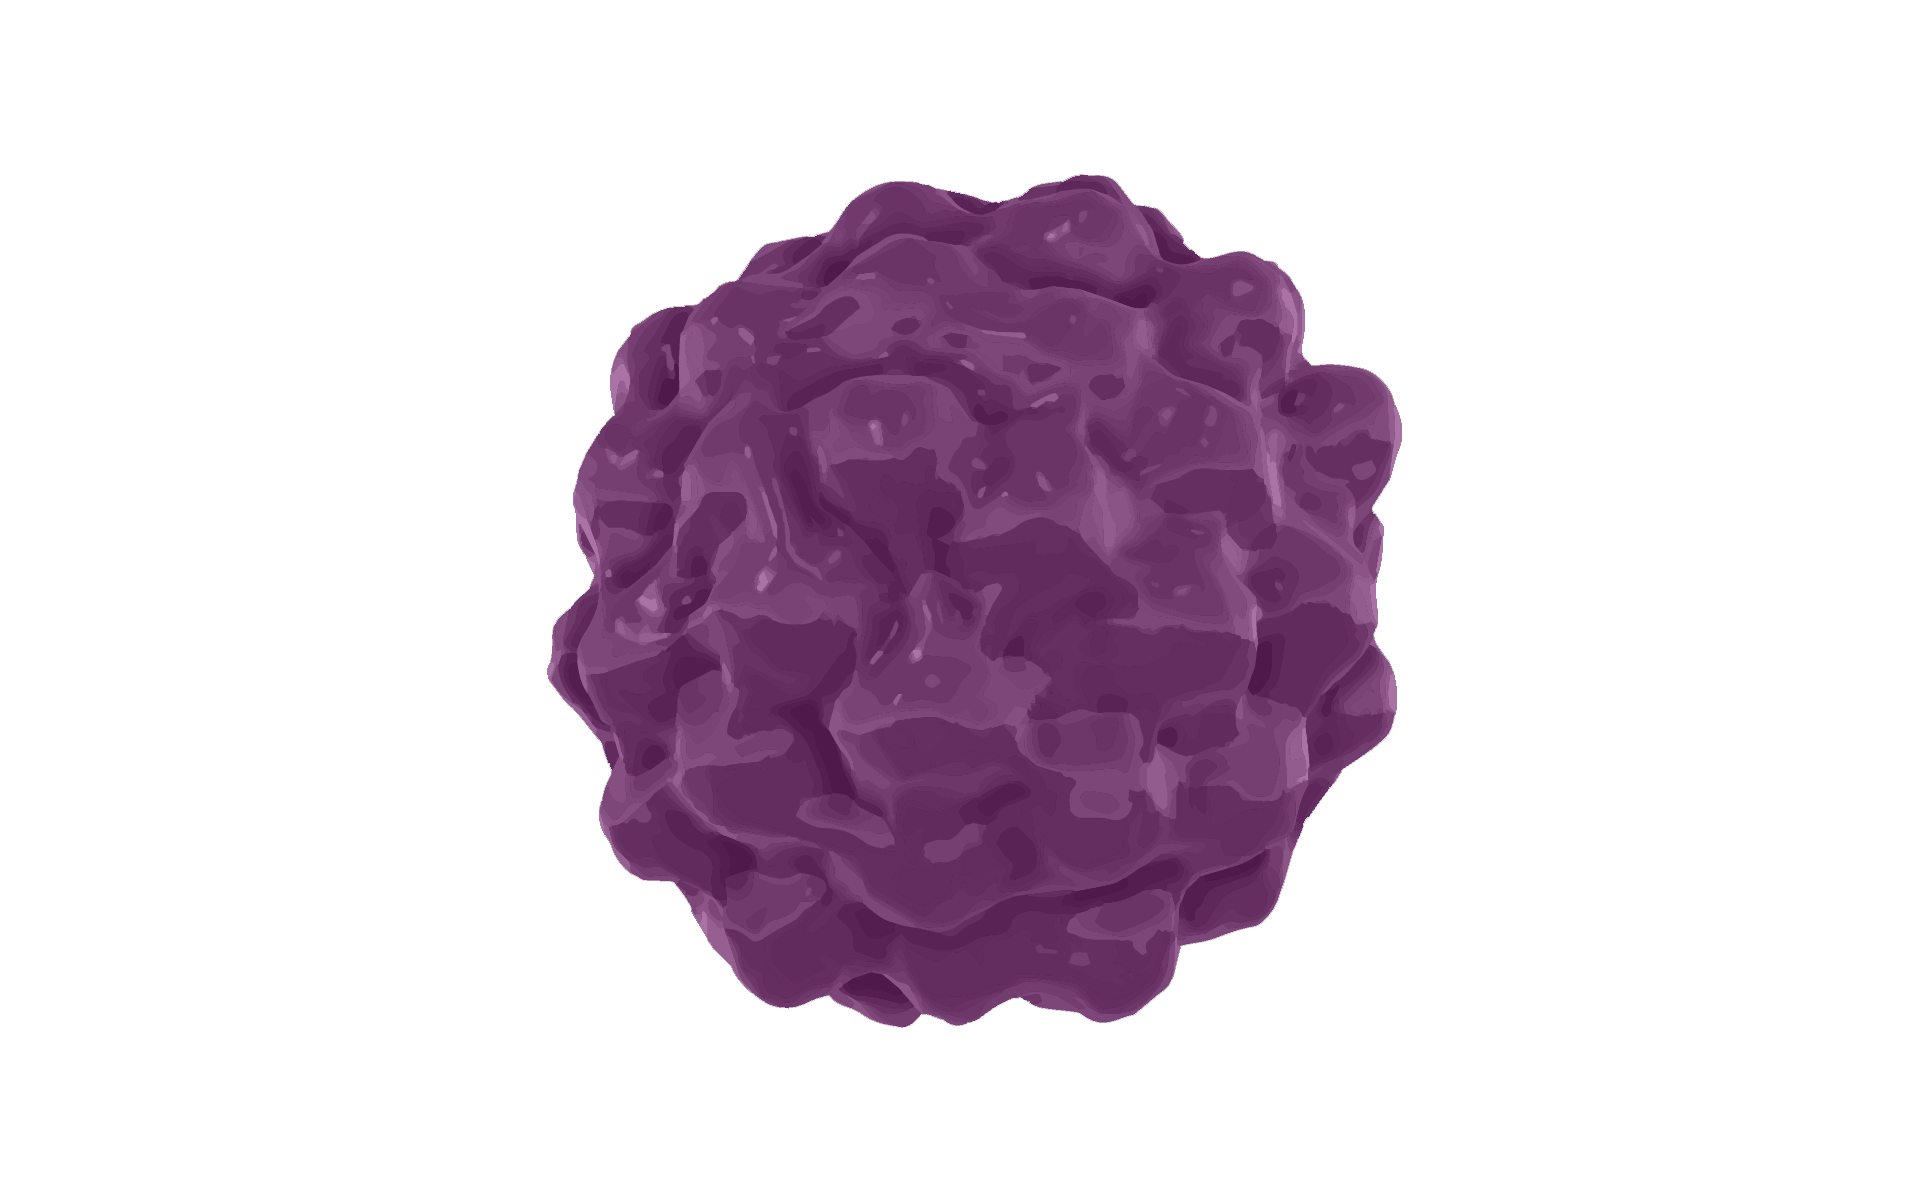 A 3D graphic of a group of cells